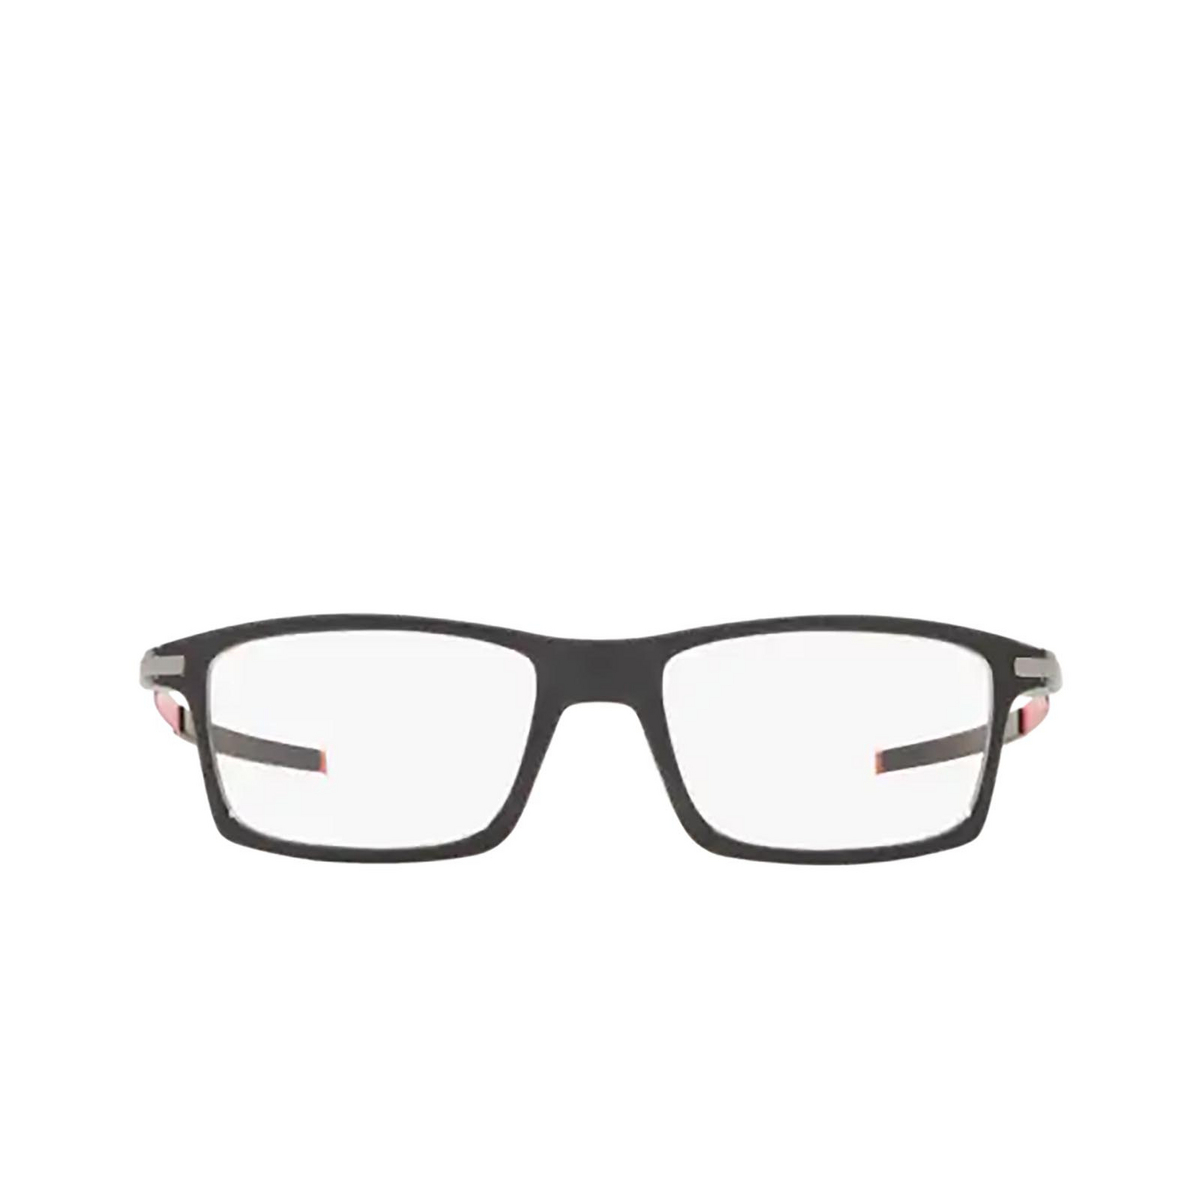 Oakley® Rectangle Eyeglasses: Pitchman OX8050 color Black Ink 805015 - front view.